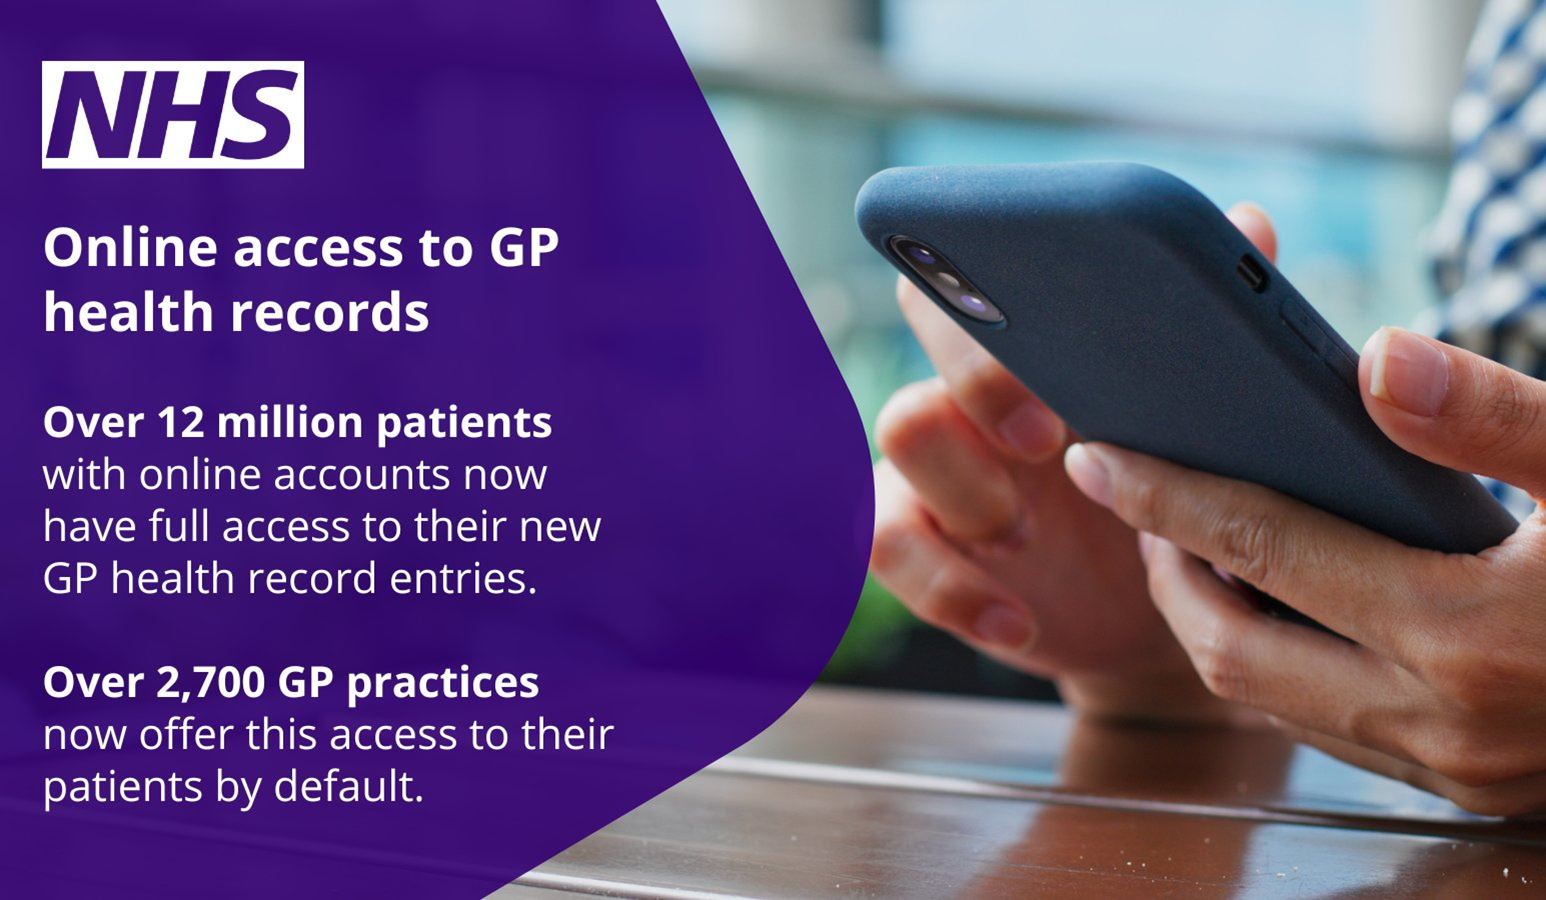 a person holding a smartphone, the NHS logo and the words Online access to GP health records.  Over 12 million patients withonline accounts now have full access to their new GP health record entries.  Over 2,700 practices now offer this access to their patients by default. 